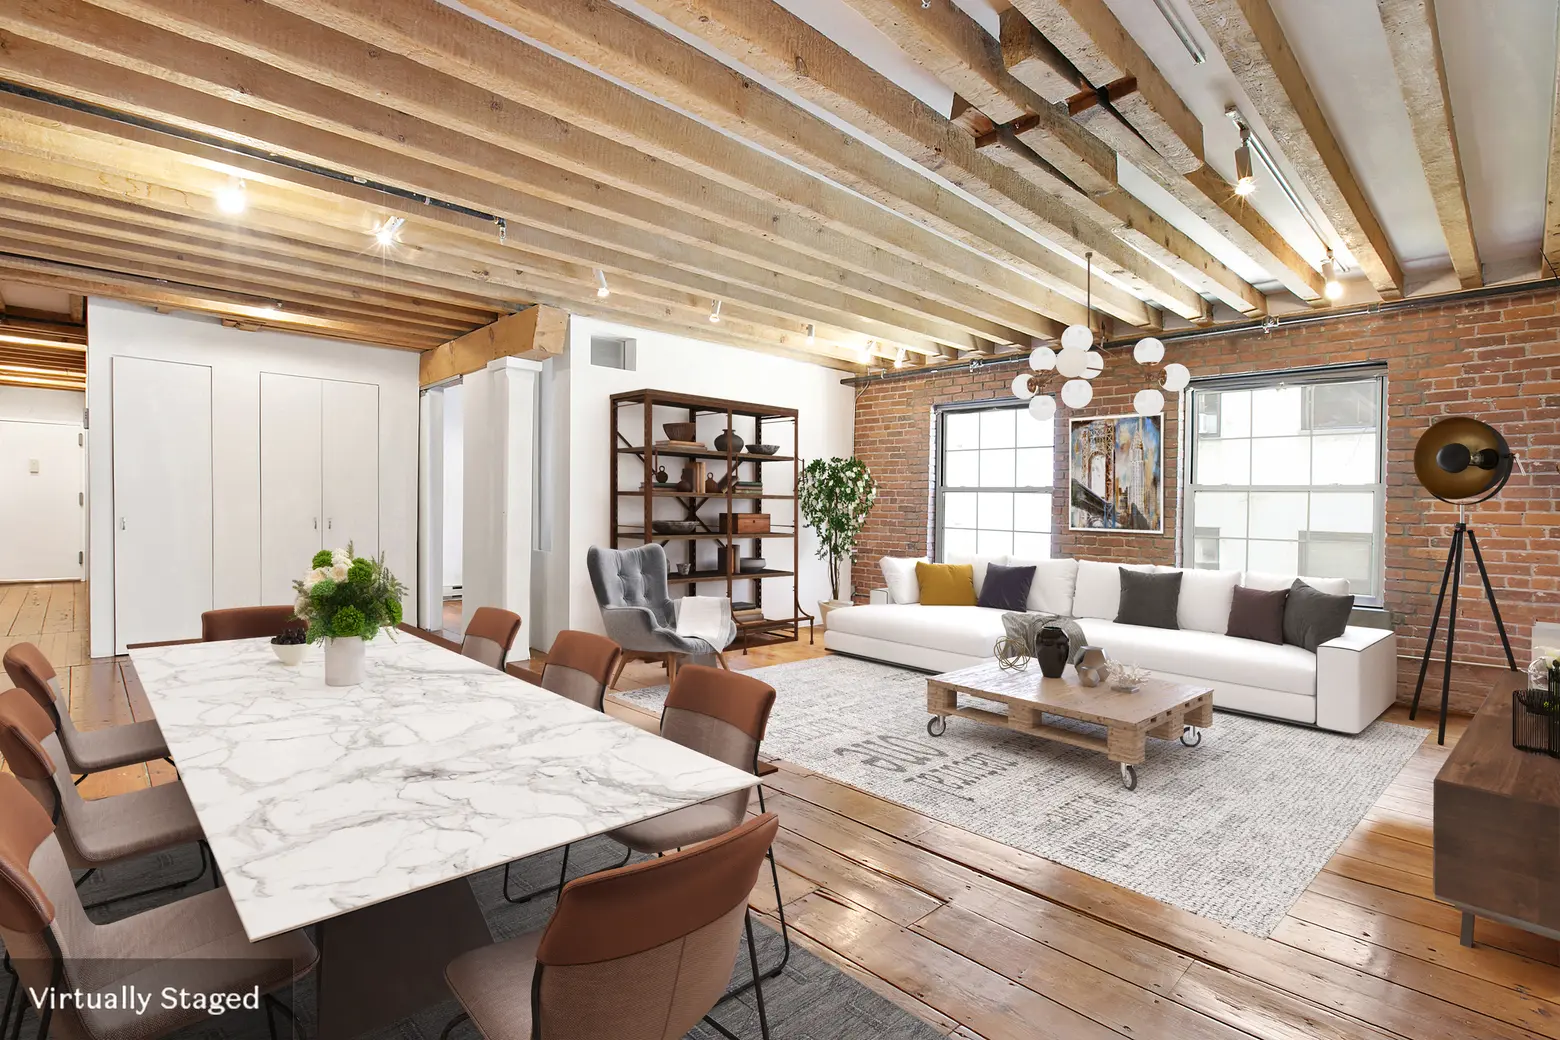 This $1.5M Seaport loft is a refreshing mix of old and new